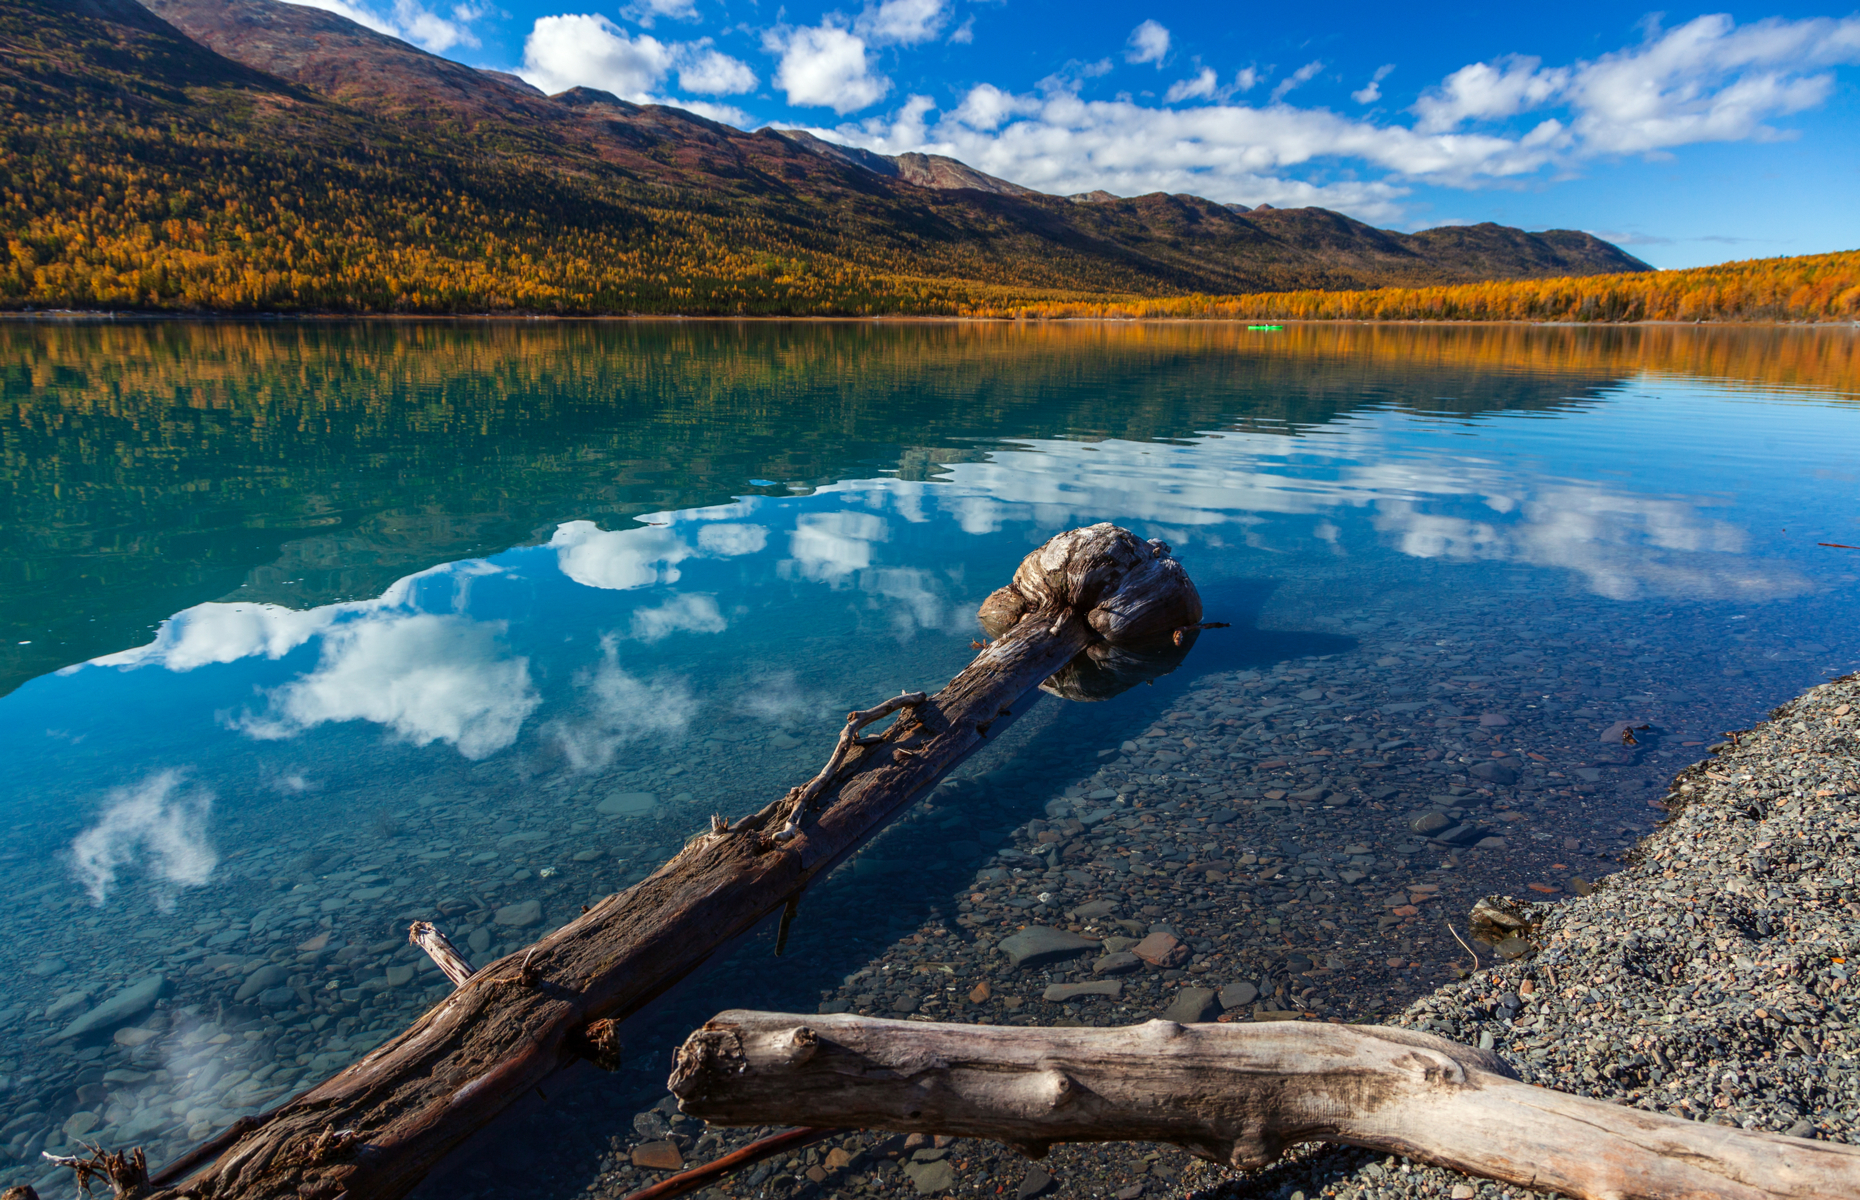 <p class="p1"><span>Seeing as though it’s by far the biggest state, it should come as no surprise that Alaska is full of hidden gems, but perhaps the best-kept secret is the stunning glacial <a href="https://www.anchorage.net/discover/the-chugach/eklutna-lake/" rel="noreferrer noopener"><span>Eklutna Lake</span></a>, located just outside of Anchorage and popular among locals for its stunning views and miles of scenic trails that allow you to explore the Alaskan wilderness up close. </span></p>